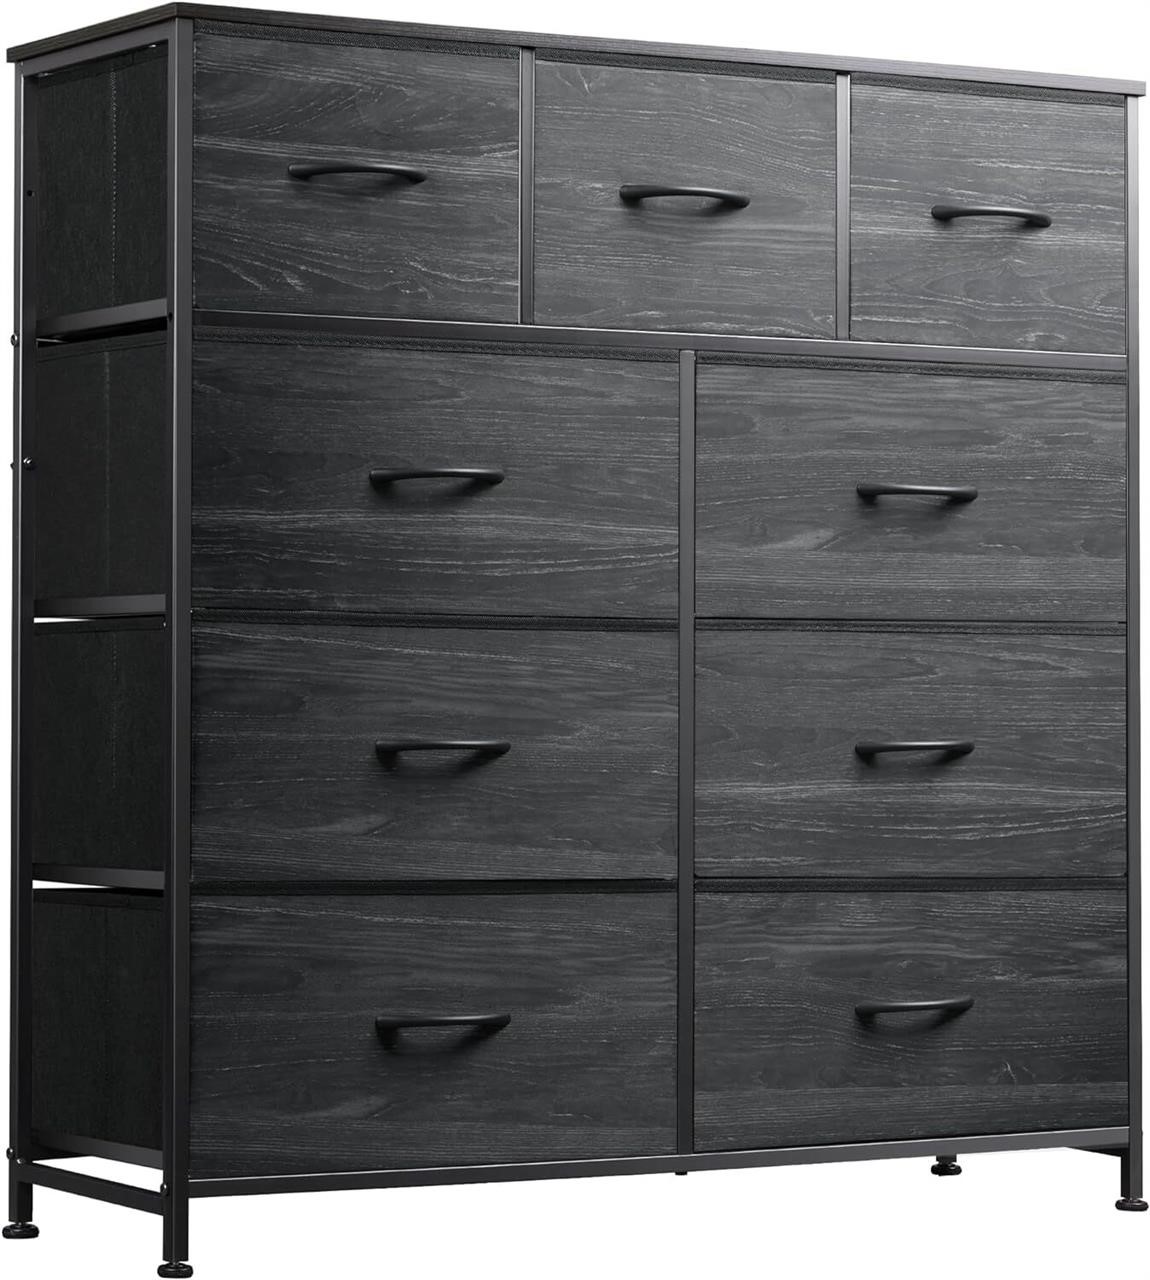 WLIVE 9-Drawer Dresser  Fabric Tower  Charcoal